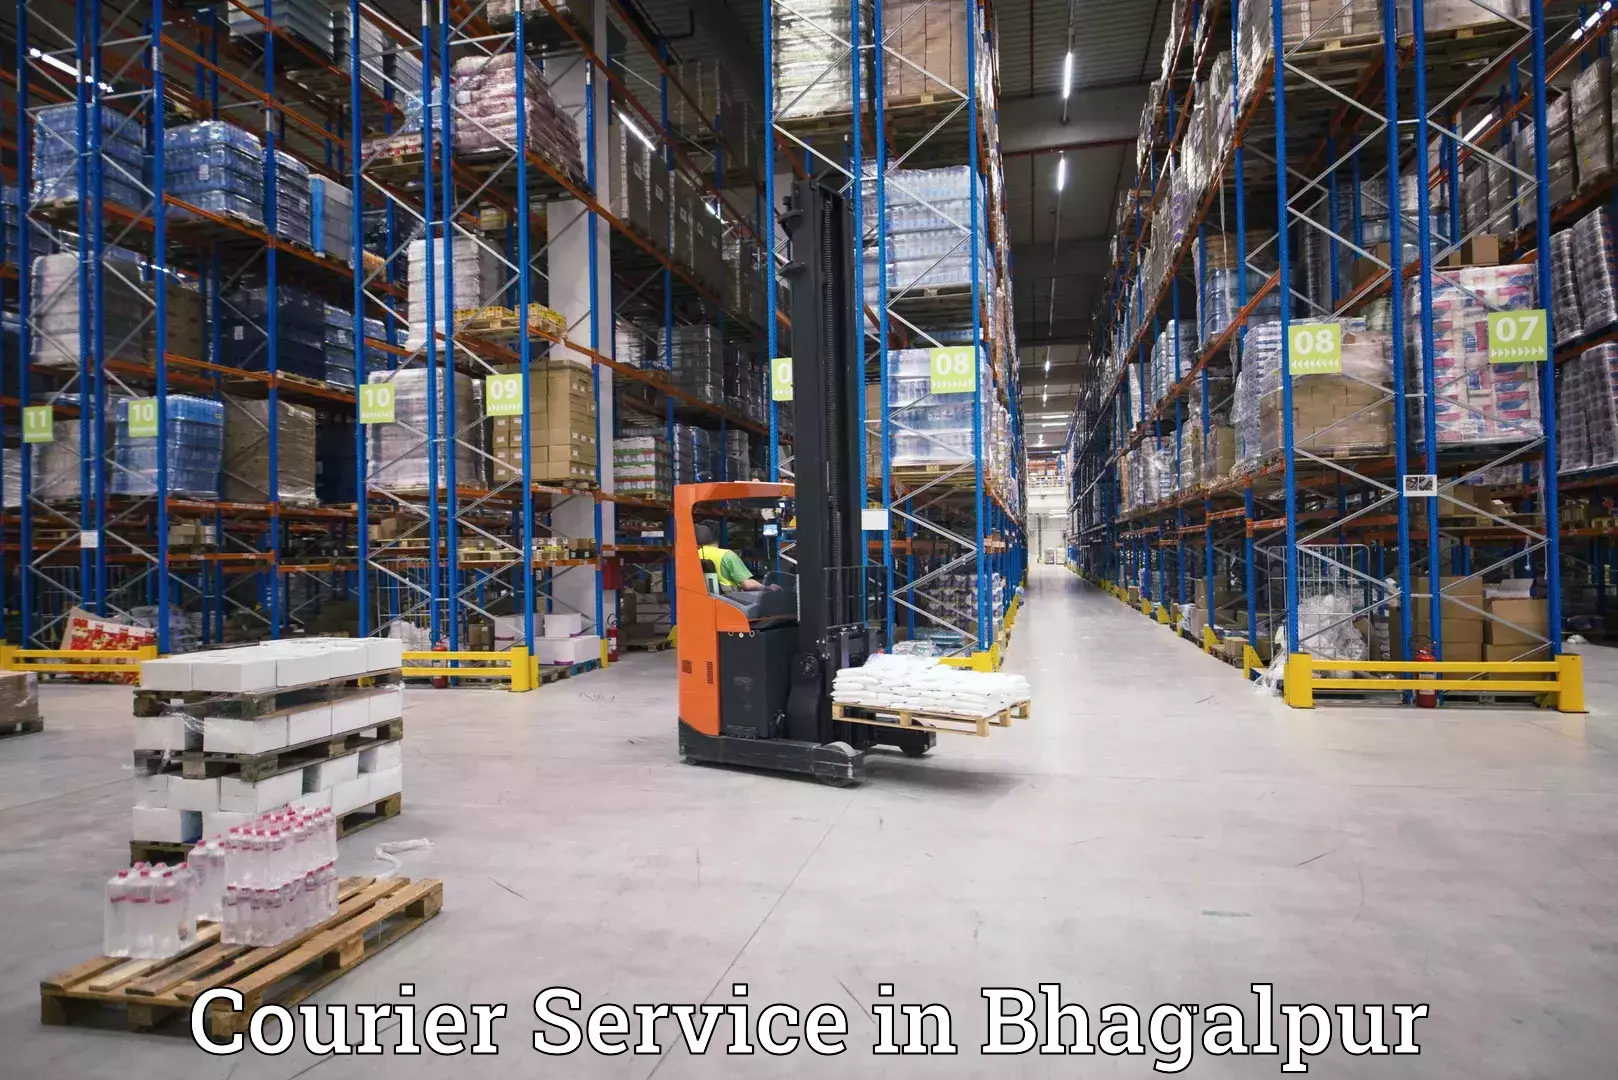 Parcel delivery automation in Bhagalpur